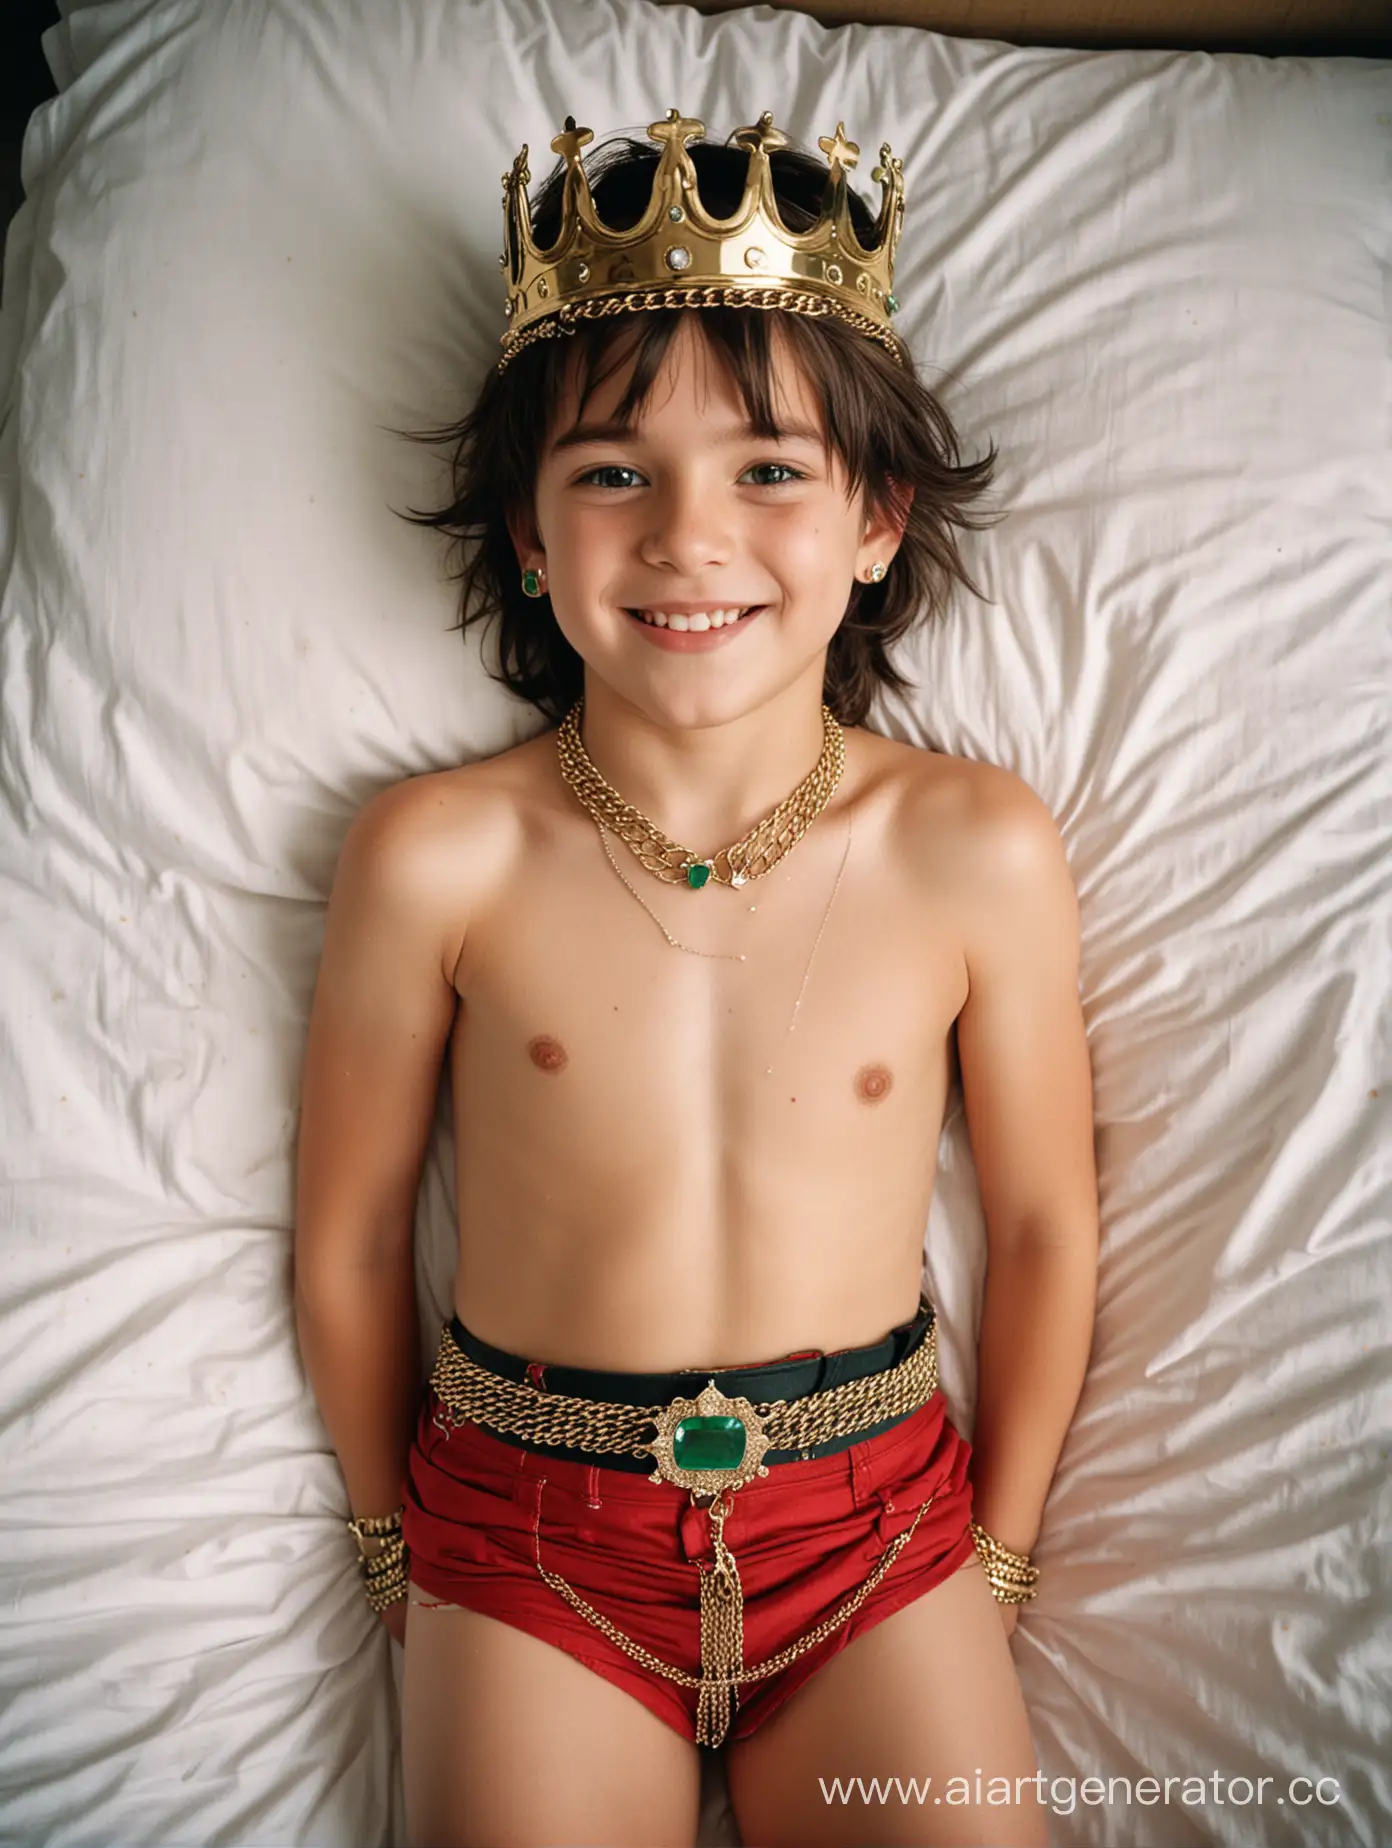 Adorable-7YearOld-Boy-Dressed-in-Extravagant-Finery-Lying-on-Bed